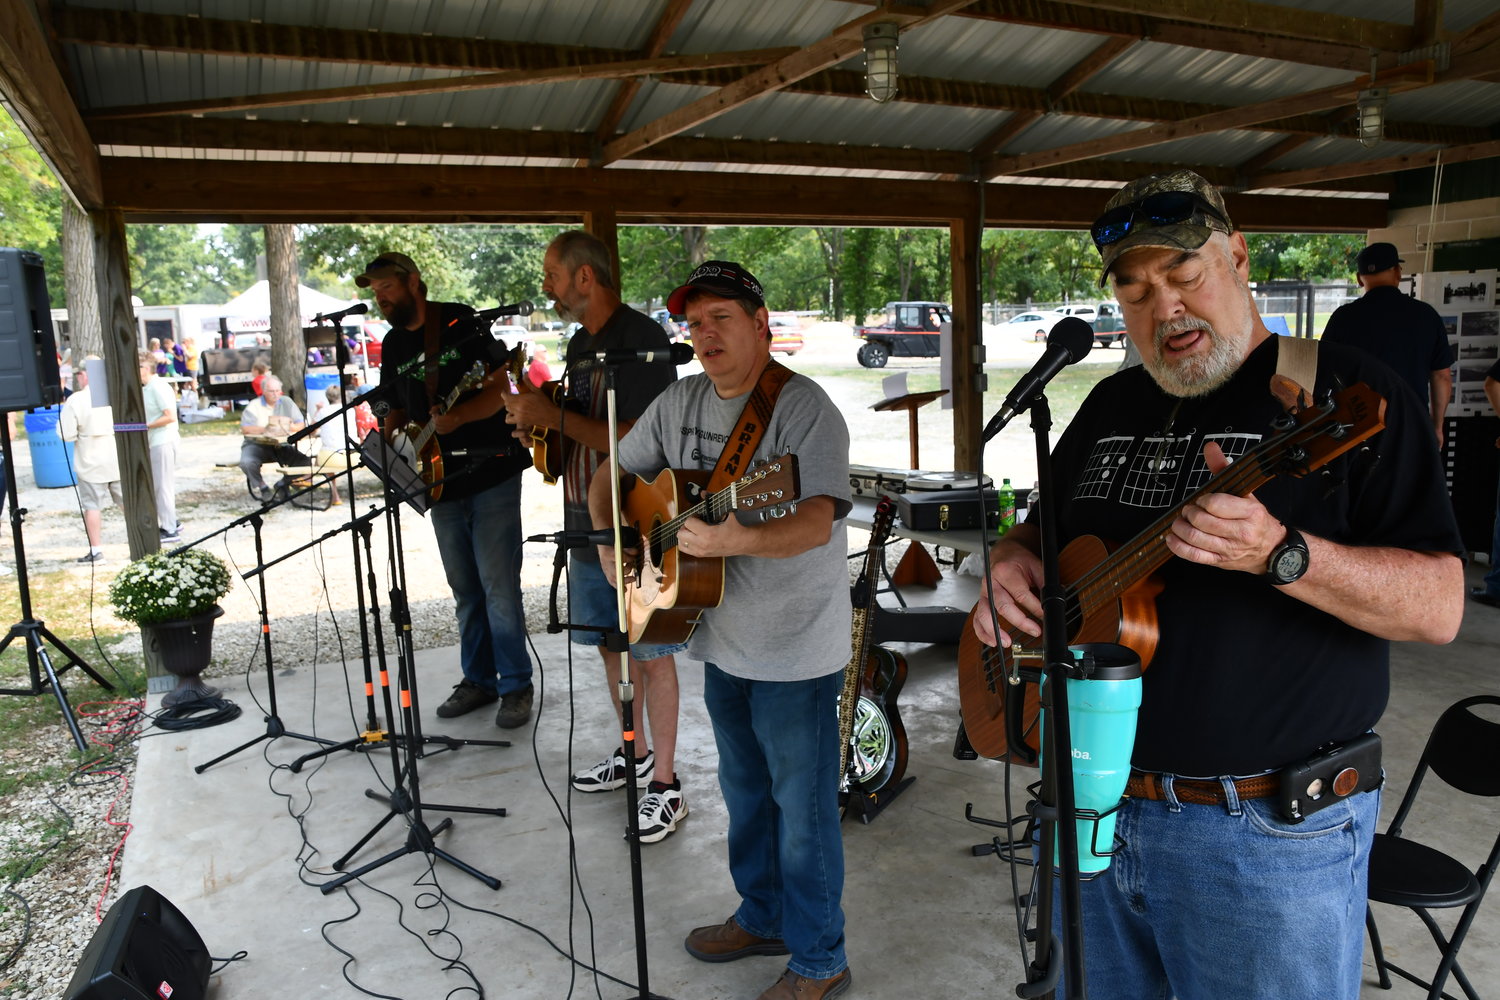 Members of the Gasconade River Band picked tunes throughout the afternoon picnic.